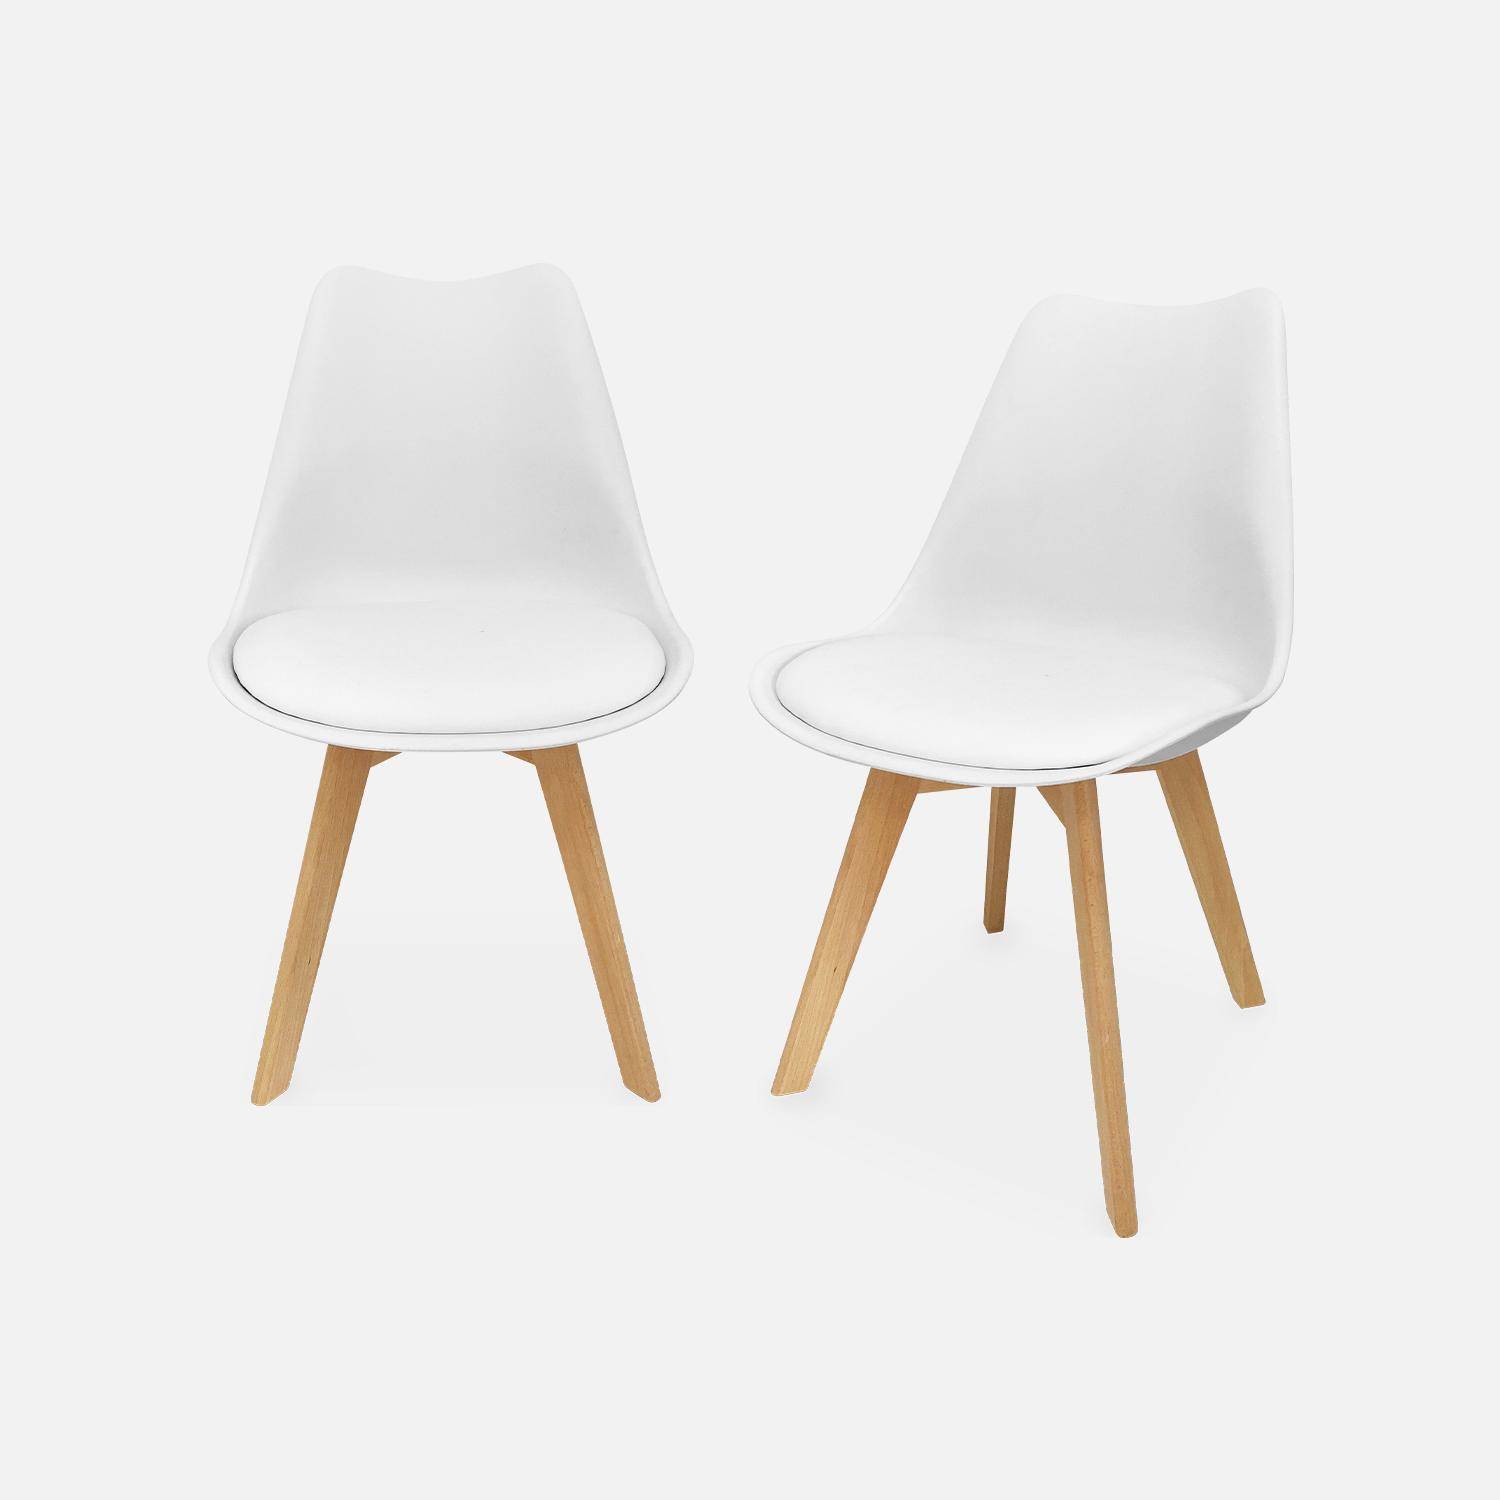 Pair of scandi-style dining chairs, white, L49xD55xH81cm, NILS Photo1